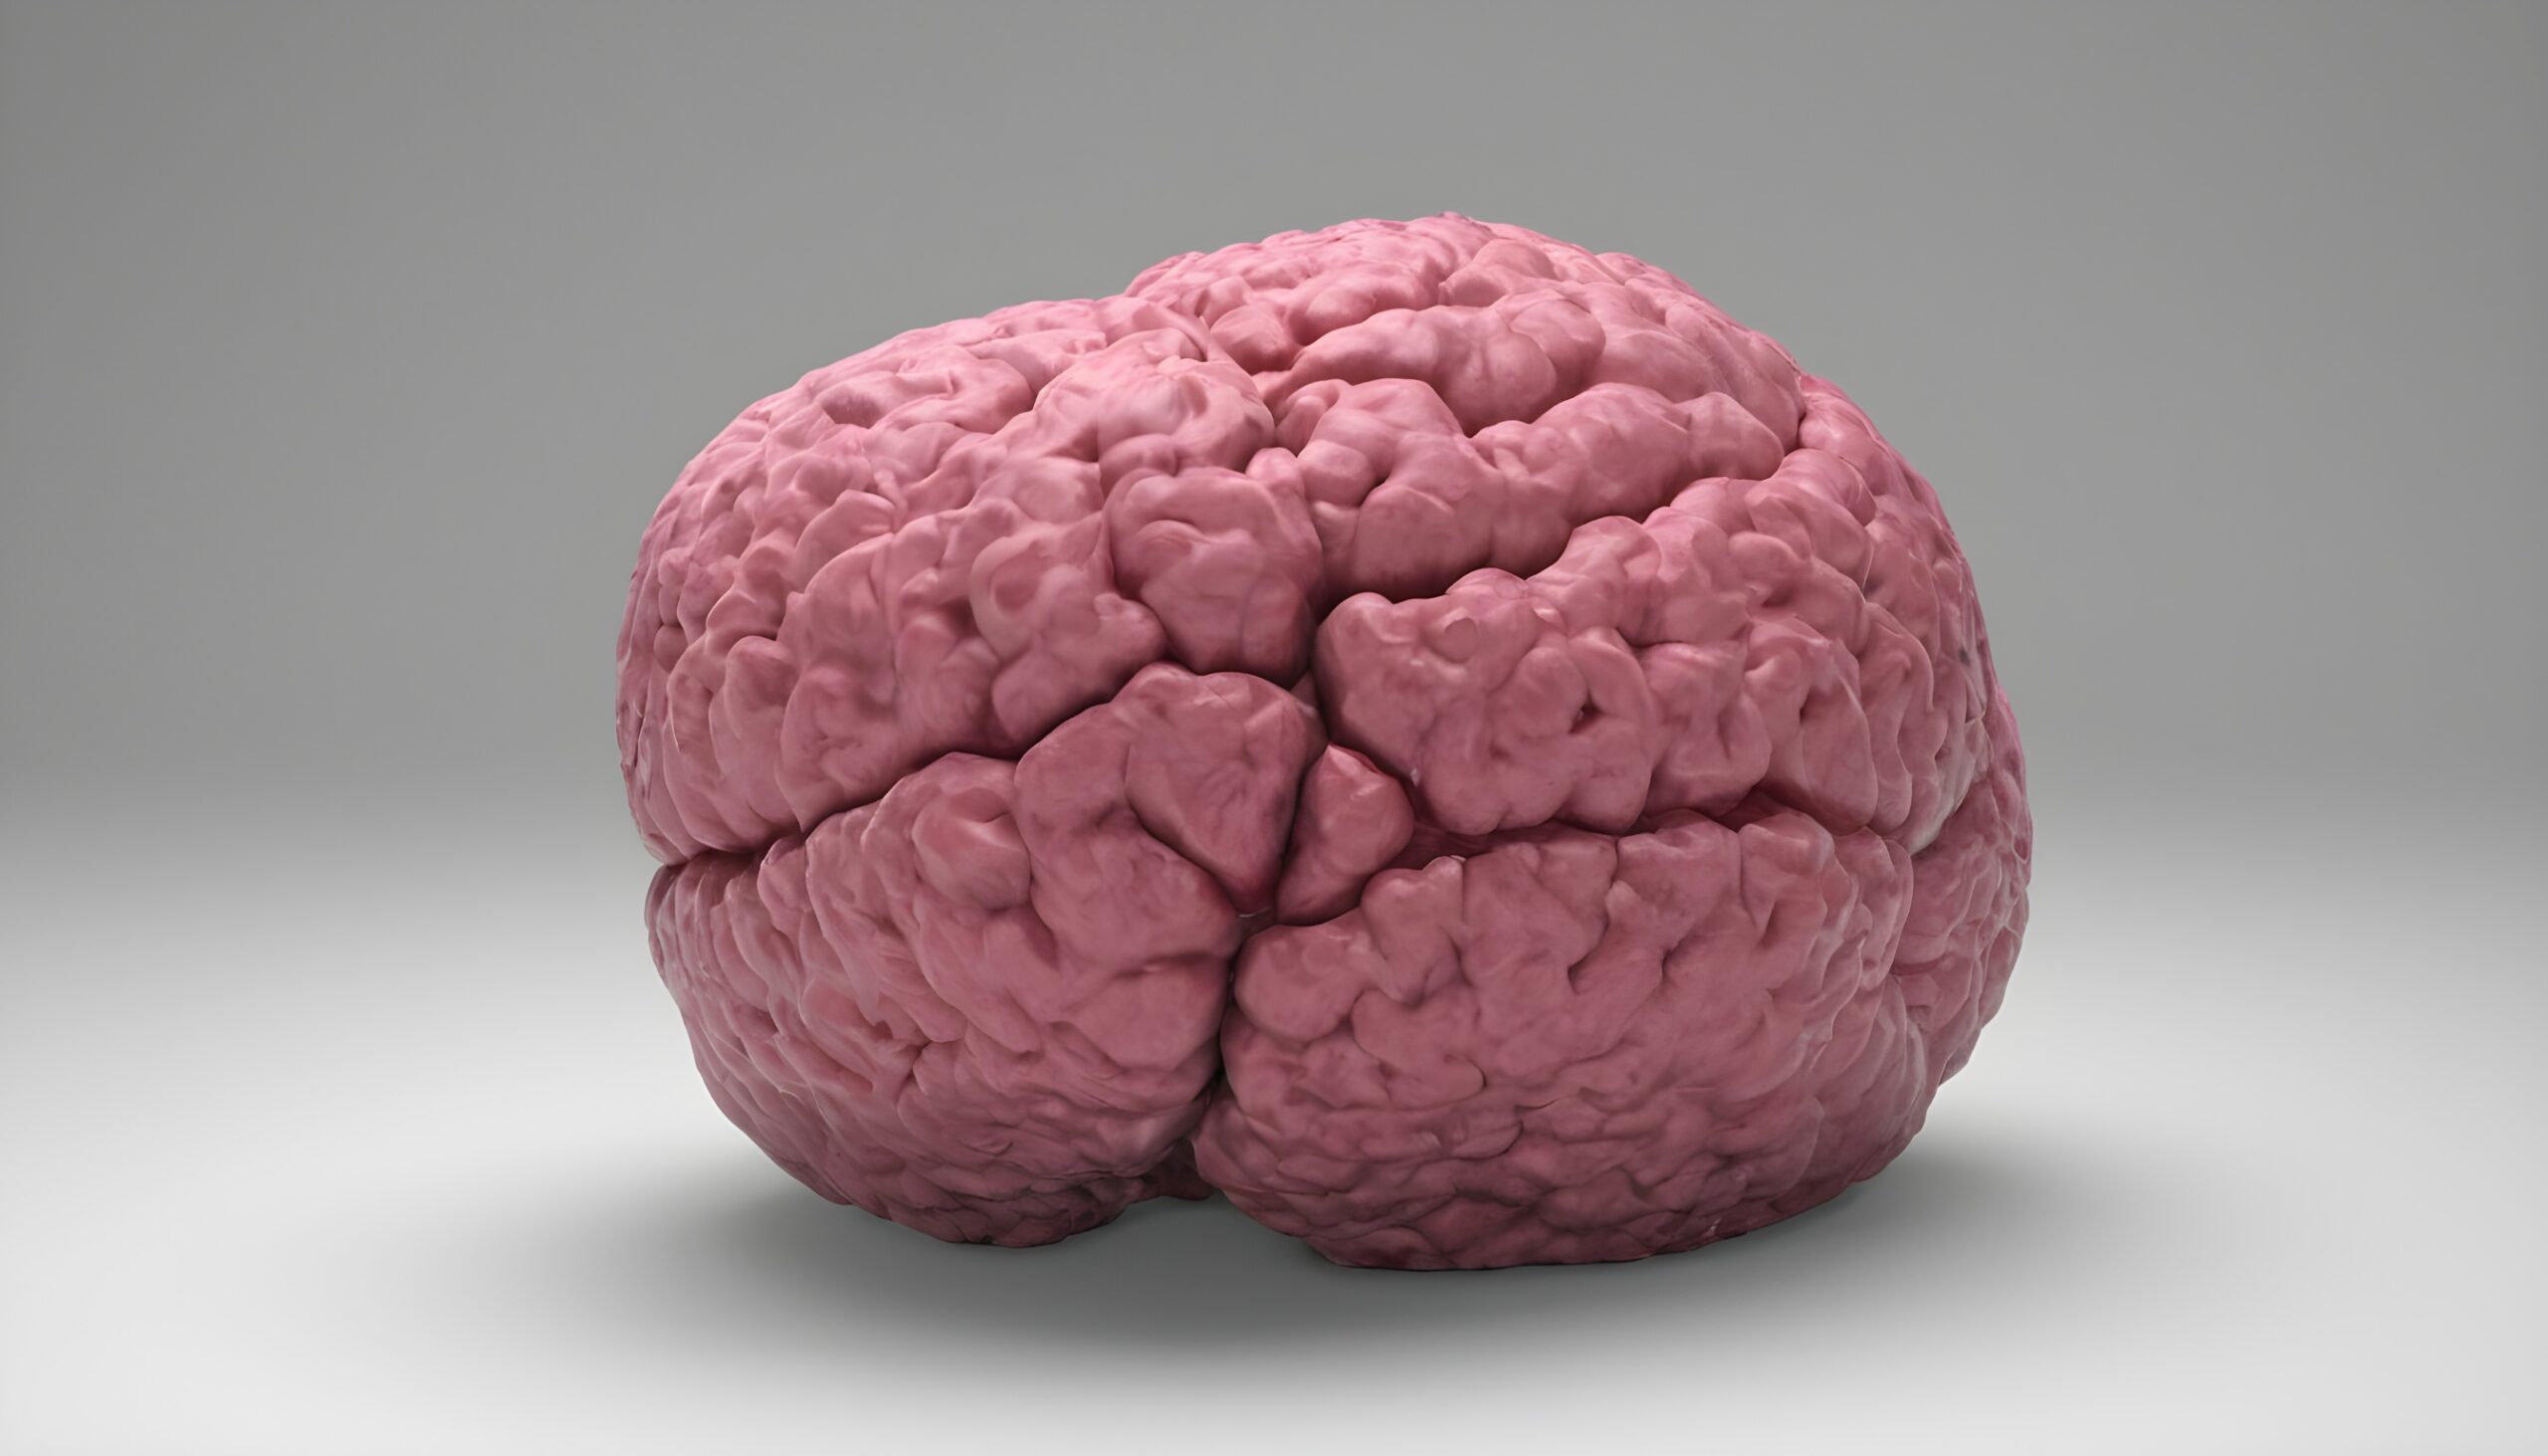 An image of the human brain illustrating the intricate journey of brain development from infancy to adulthood.